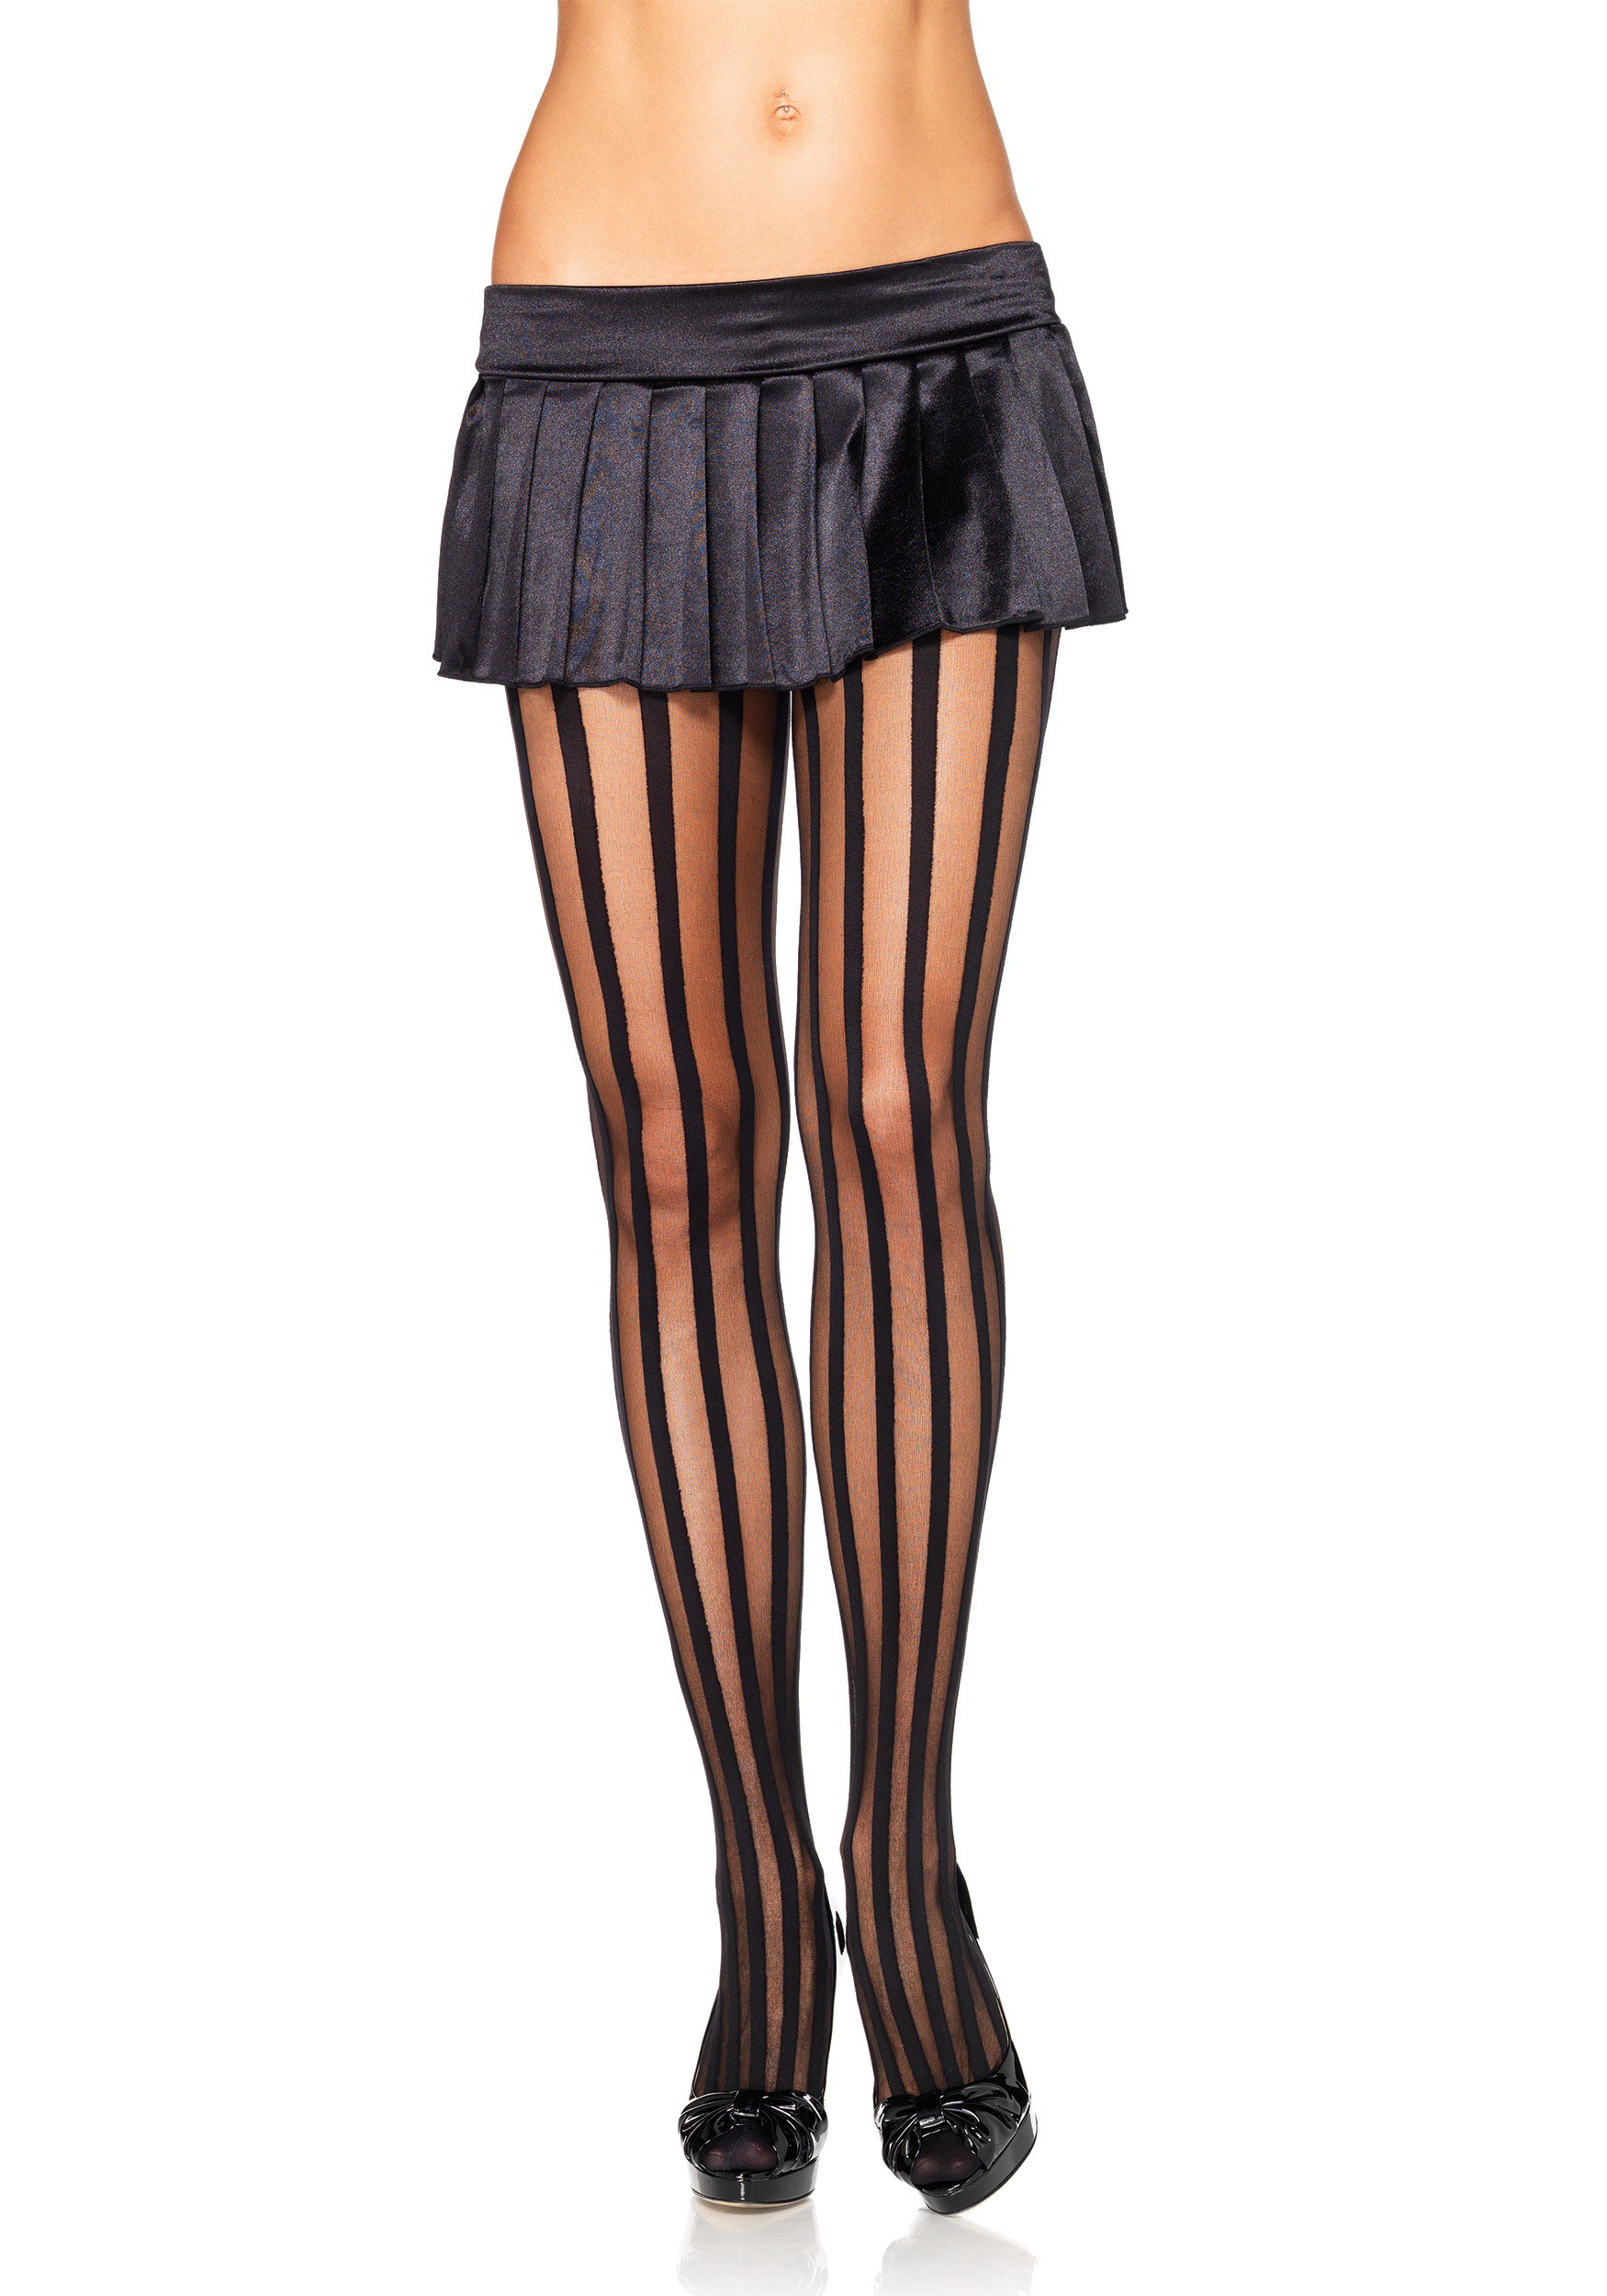 https://images.halloweencostumes.eu/products/29956/1-1/vertical-striped-pantyhose.jpg